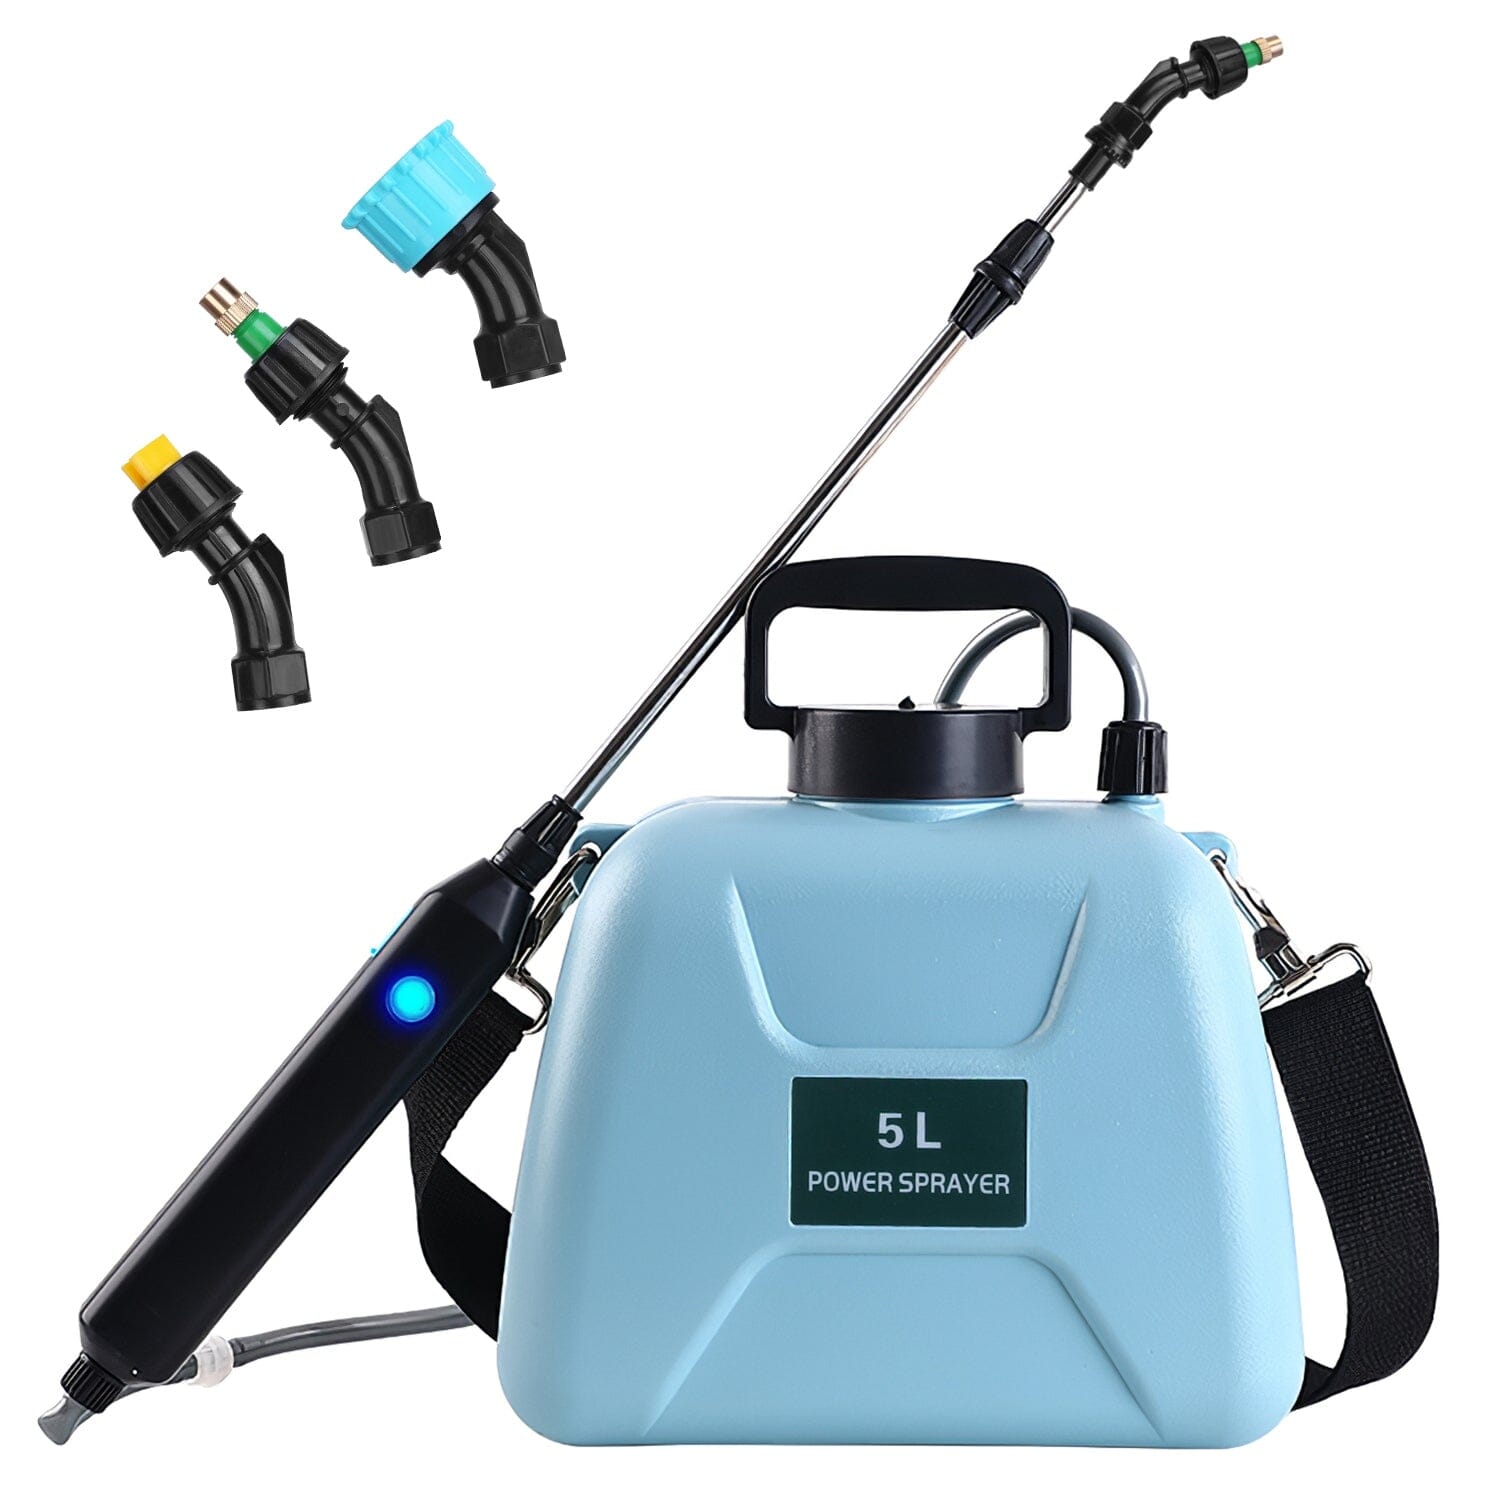 5L/1/3 Gallon Electric Plant Sprayer Telescopic Rechargeable with 3 Spray Sprouts